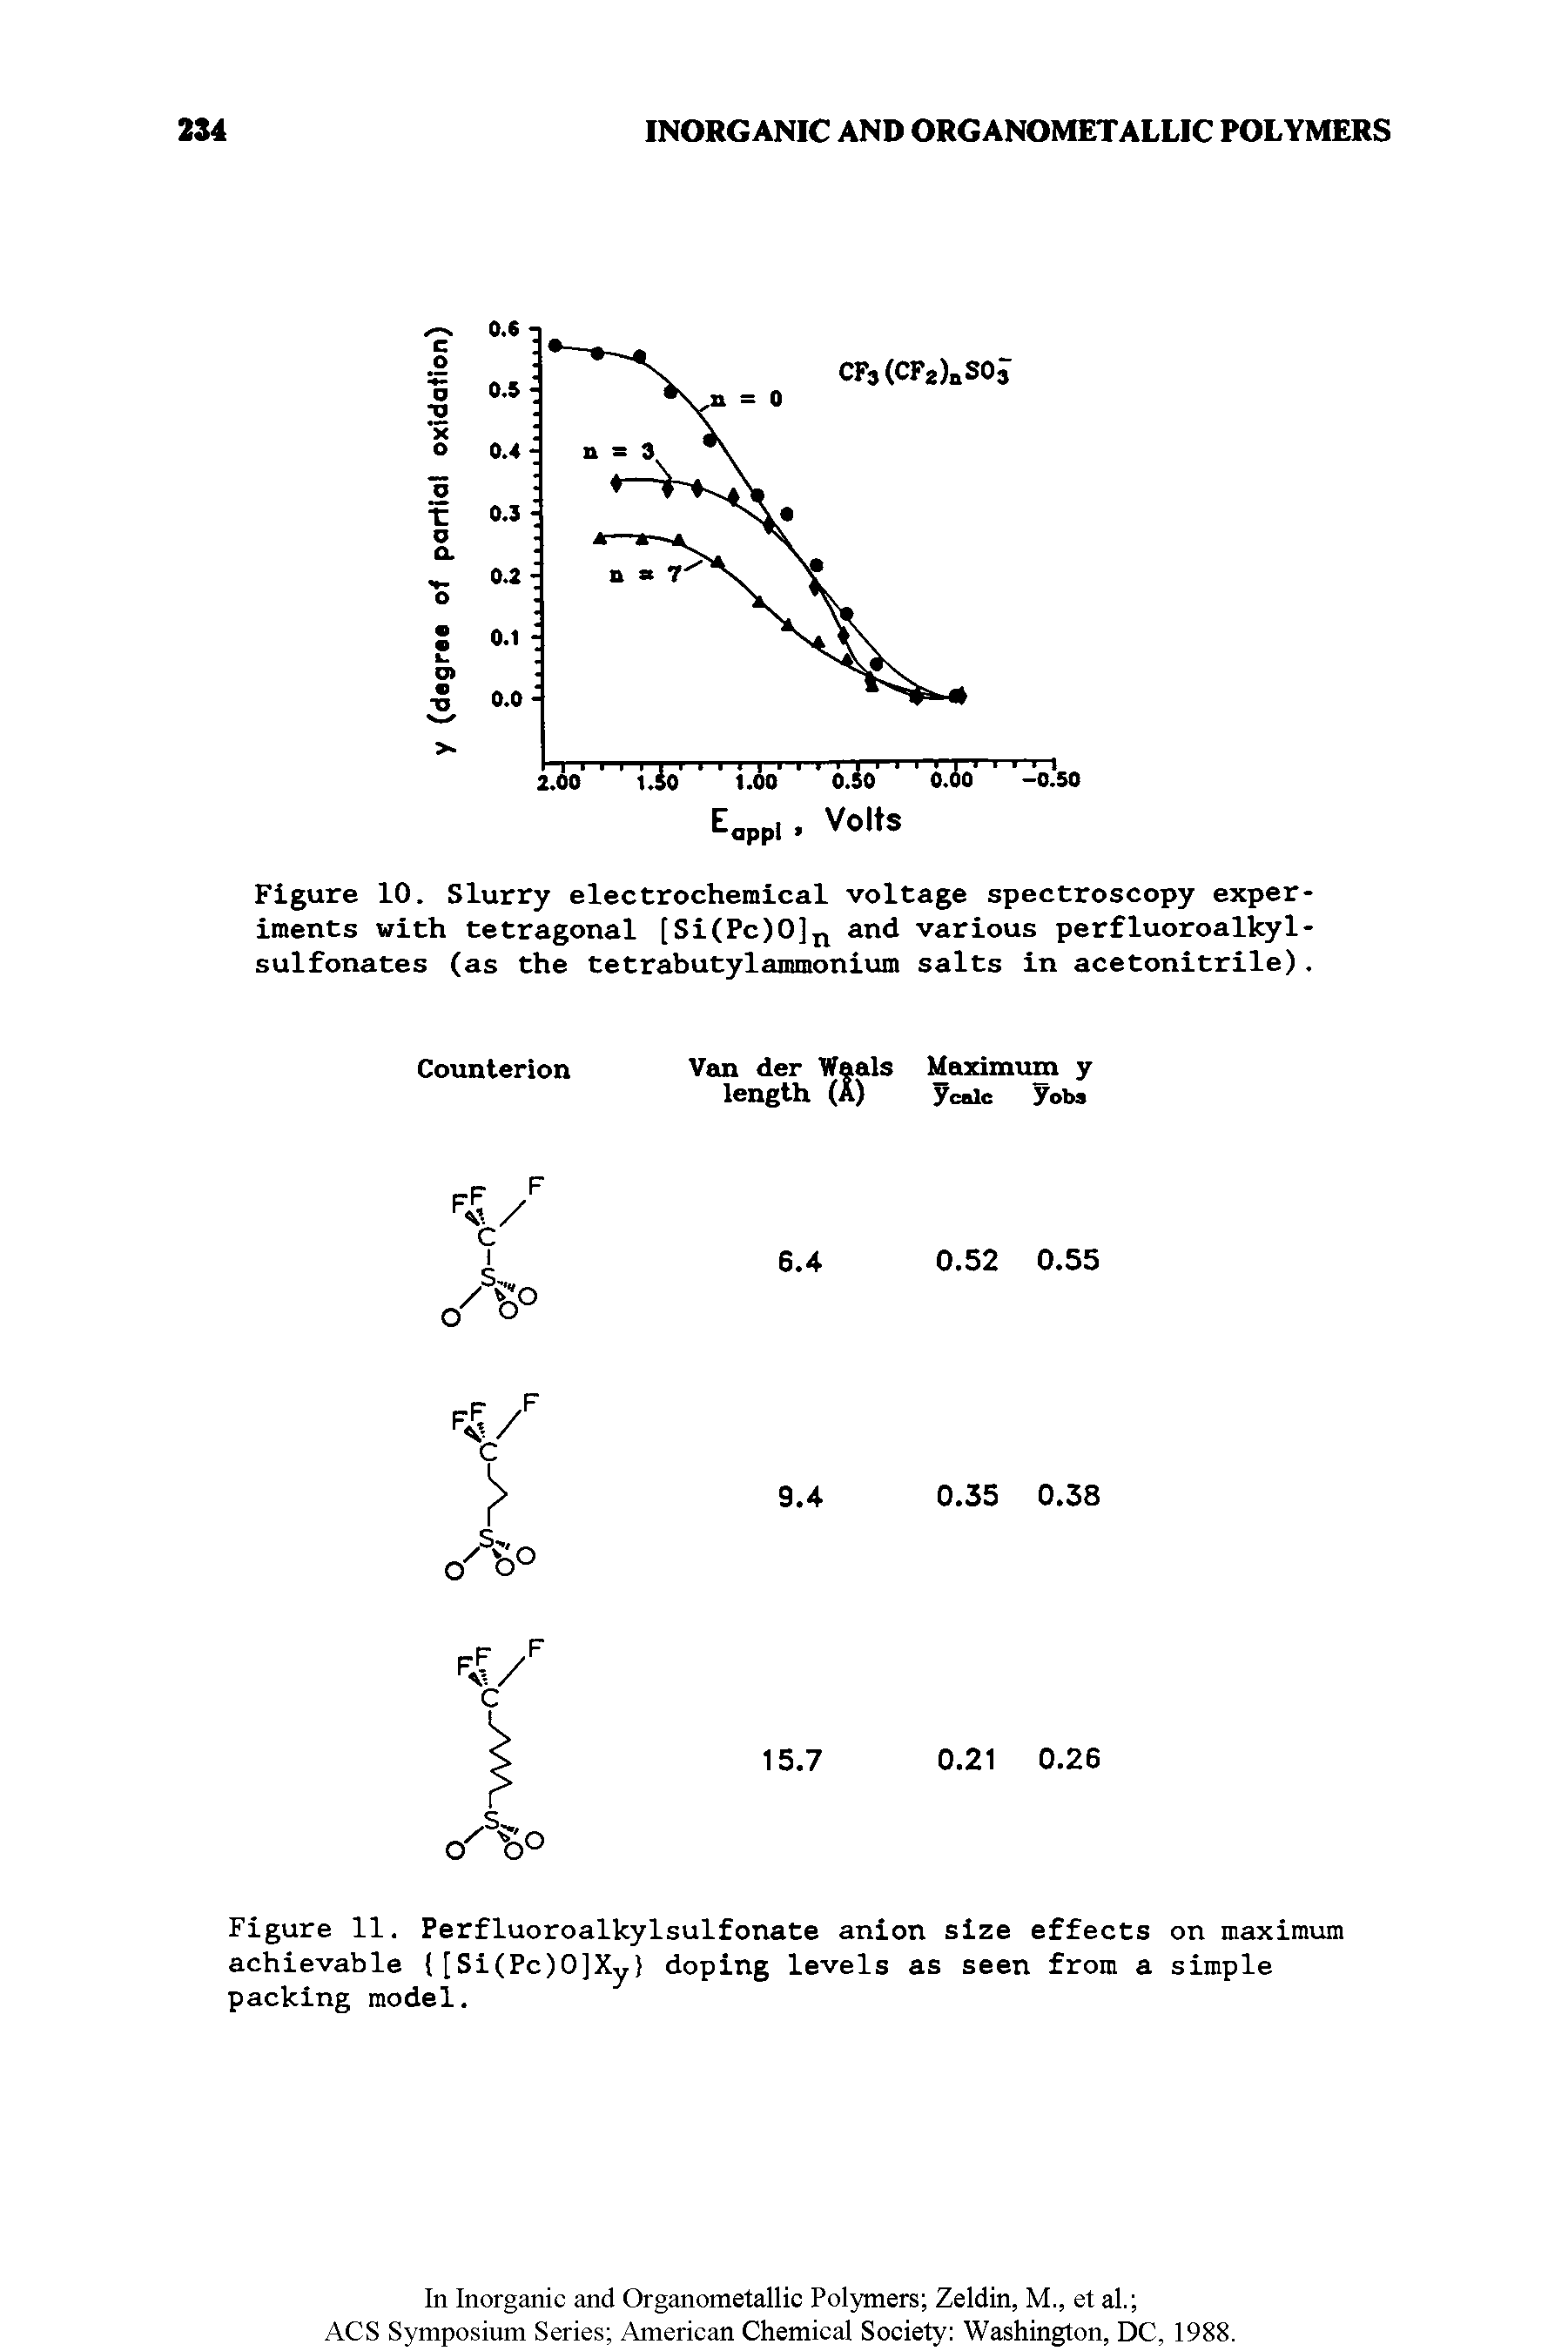 Figure 10. Slurry electrochemical voltage spectroscopy experiments with tetragonal [Si(Pc)0]n and various perfluoroalkyl-sulfonates (as the tetrabutylammonium salts in acetonitrile).